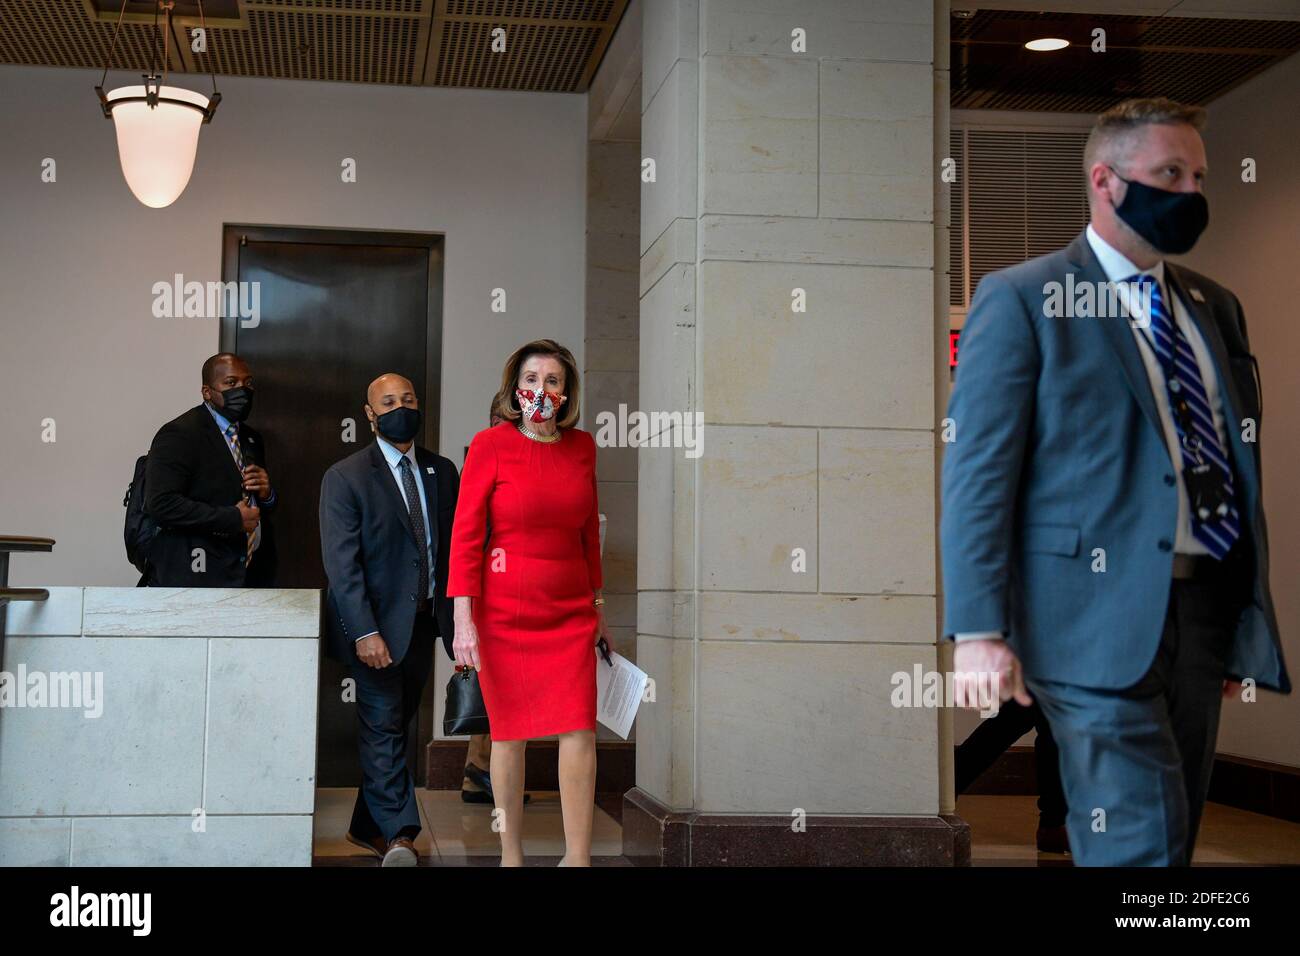 Speaker of the United States House of Representatives Nancy Pelosi (Democrat of California) arrives for her press conference at the U.S. Capitol in Washington, DC., Friday, December 4, 2020. Credit: Rod Lamkey/CNP /MediaPunch Stock Photo